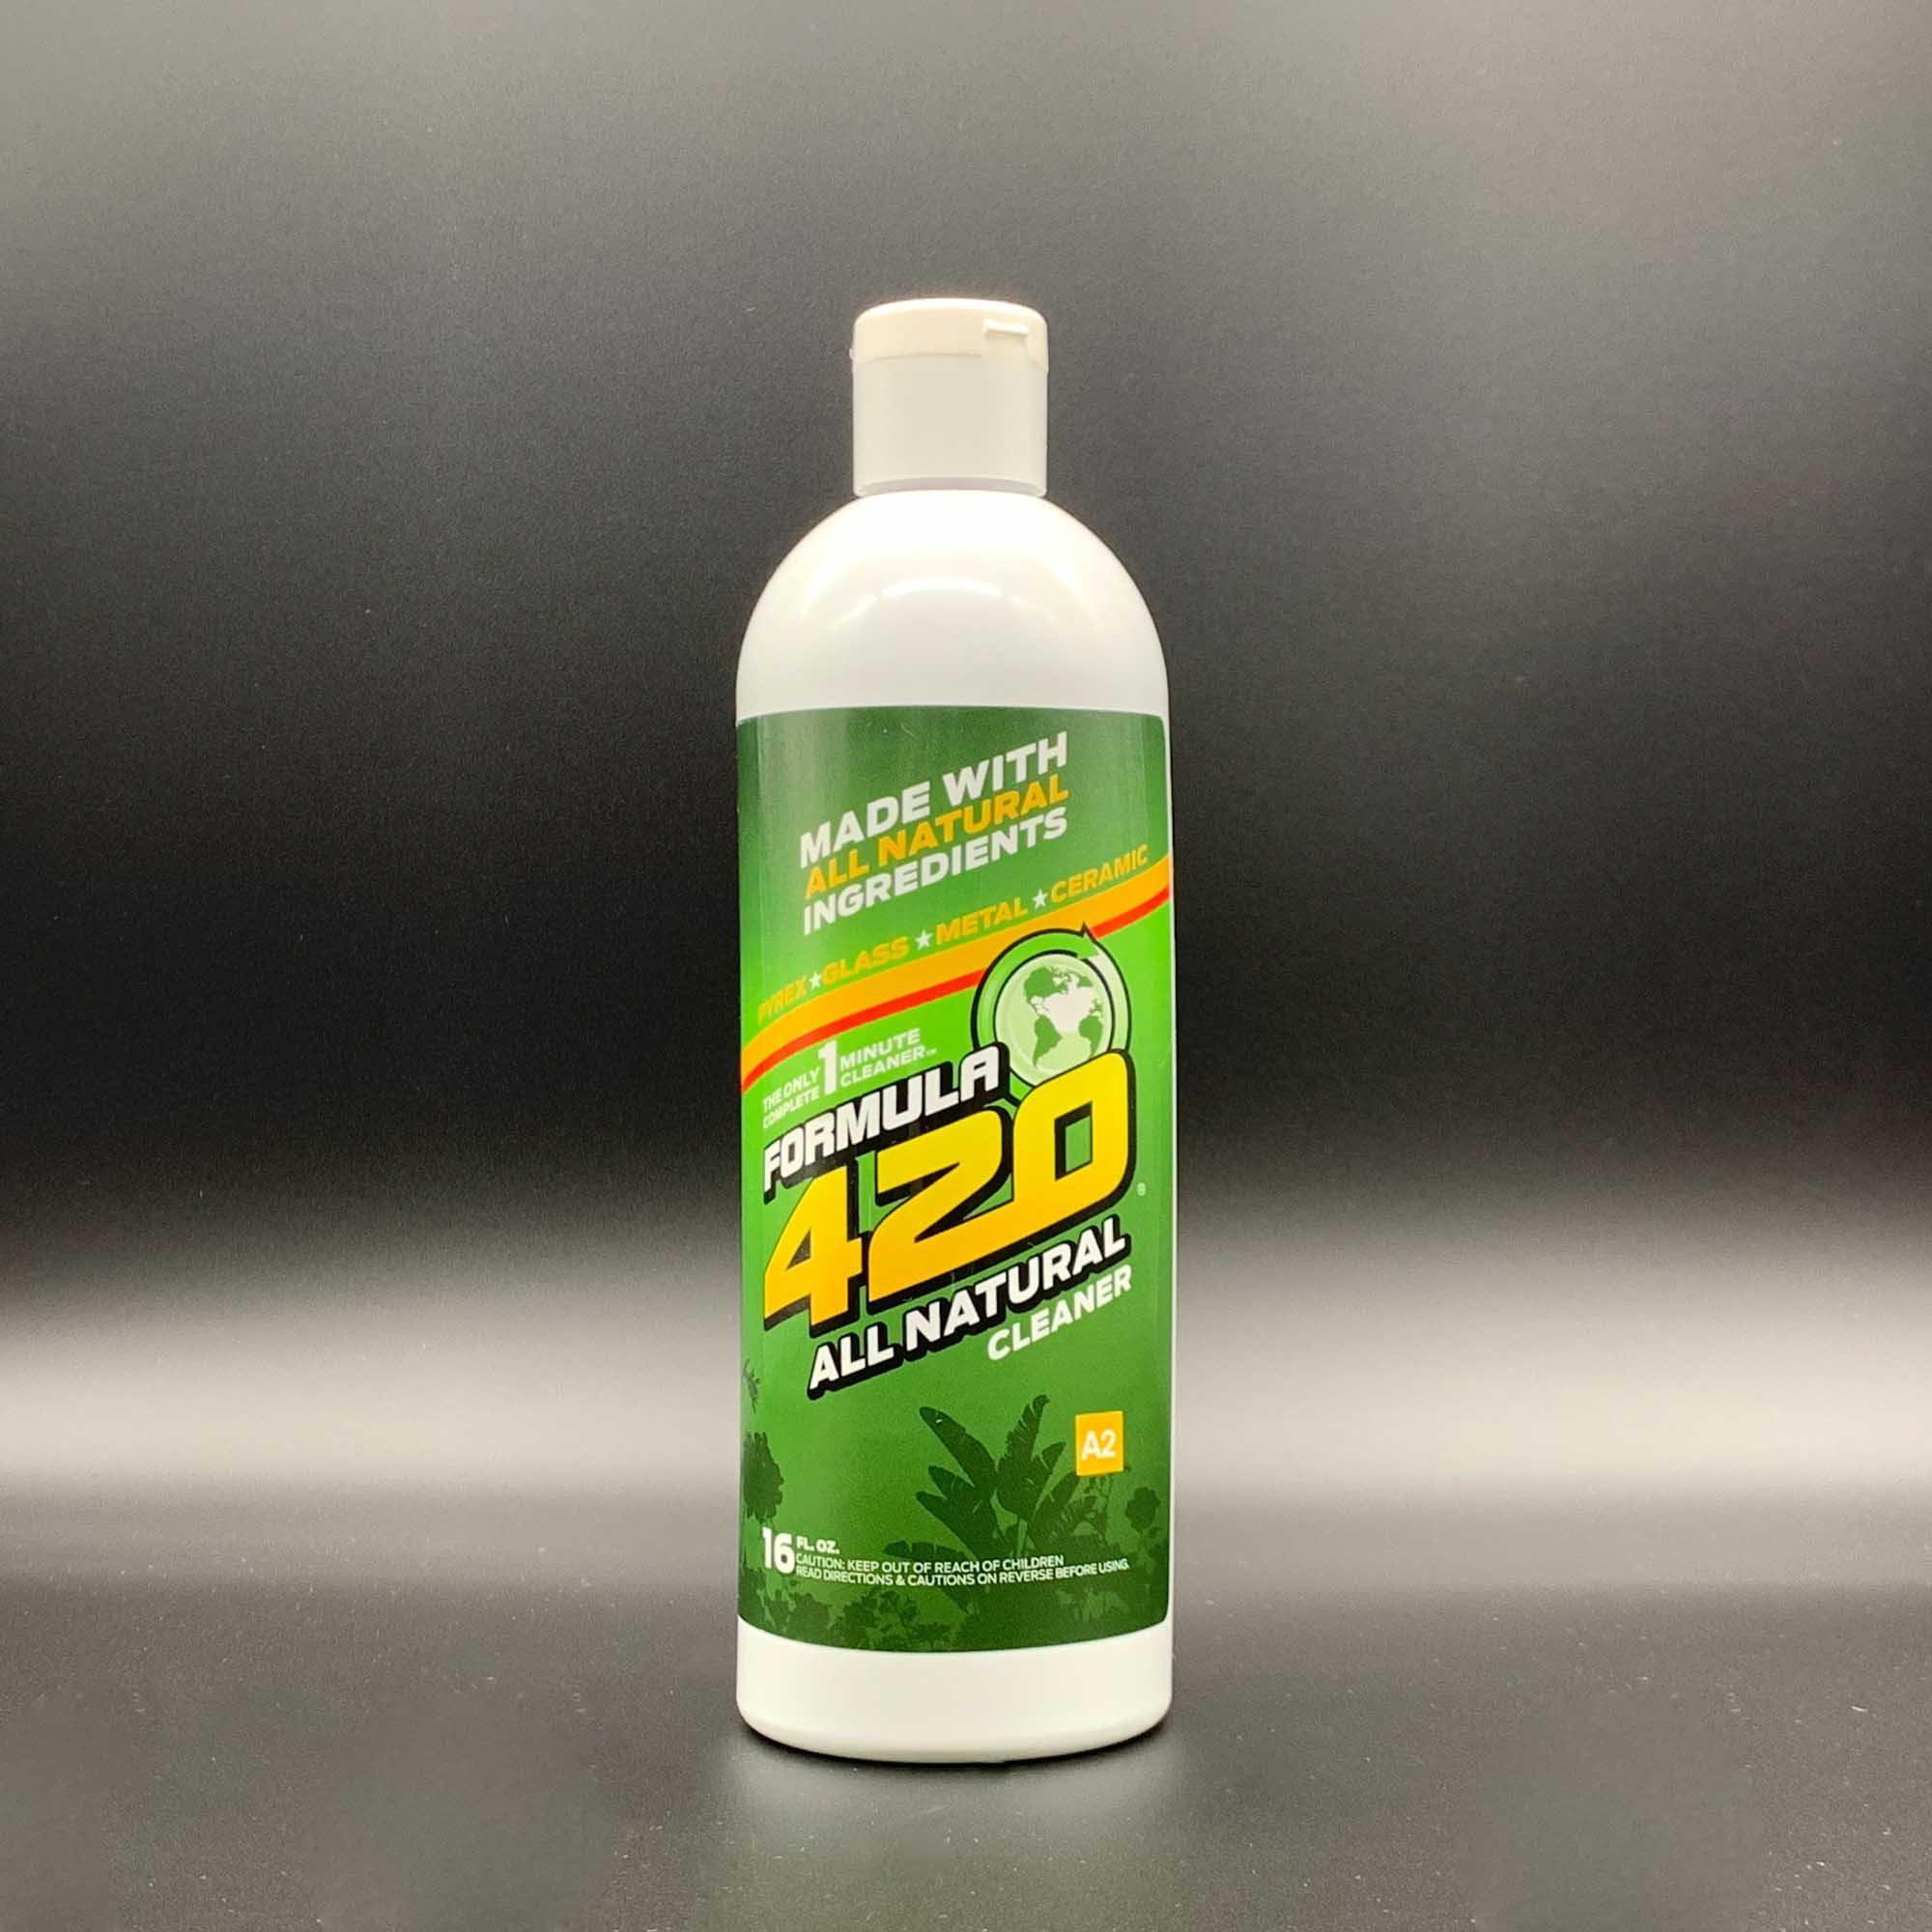 All Natural by Formula 420, Glass Cleaner